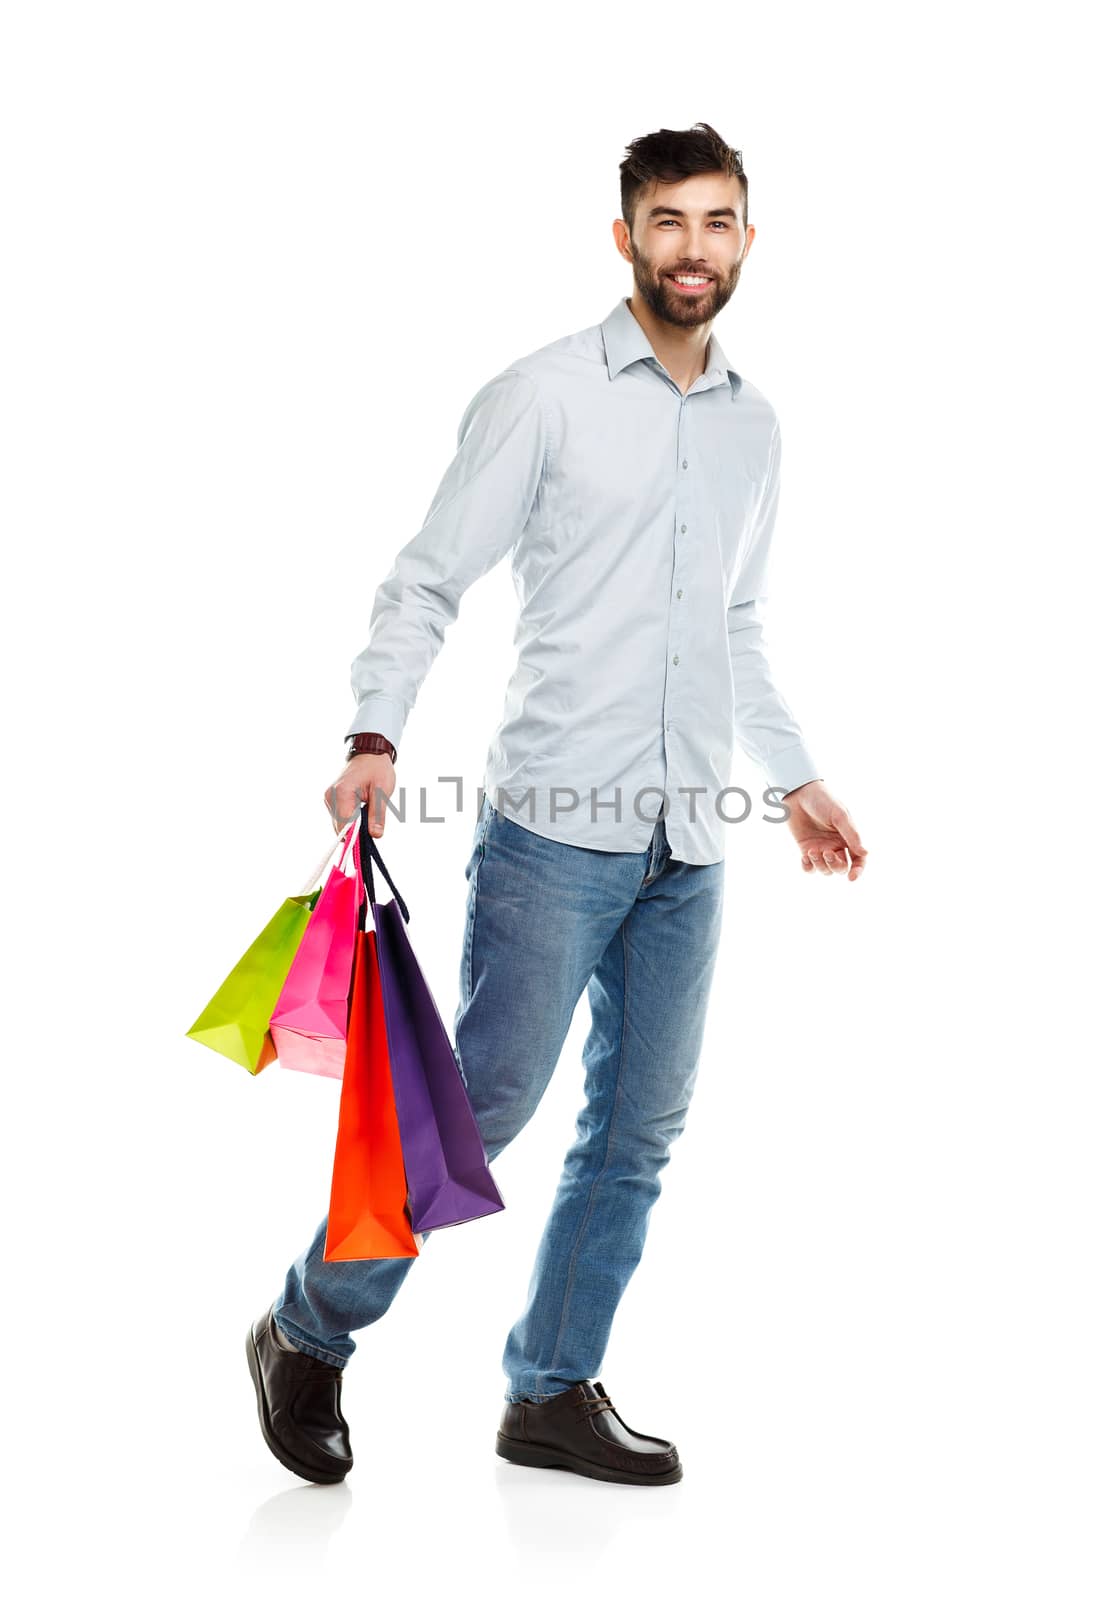 Handsome man holding shopping bags. Christmas and holidays concept